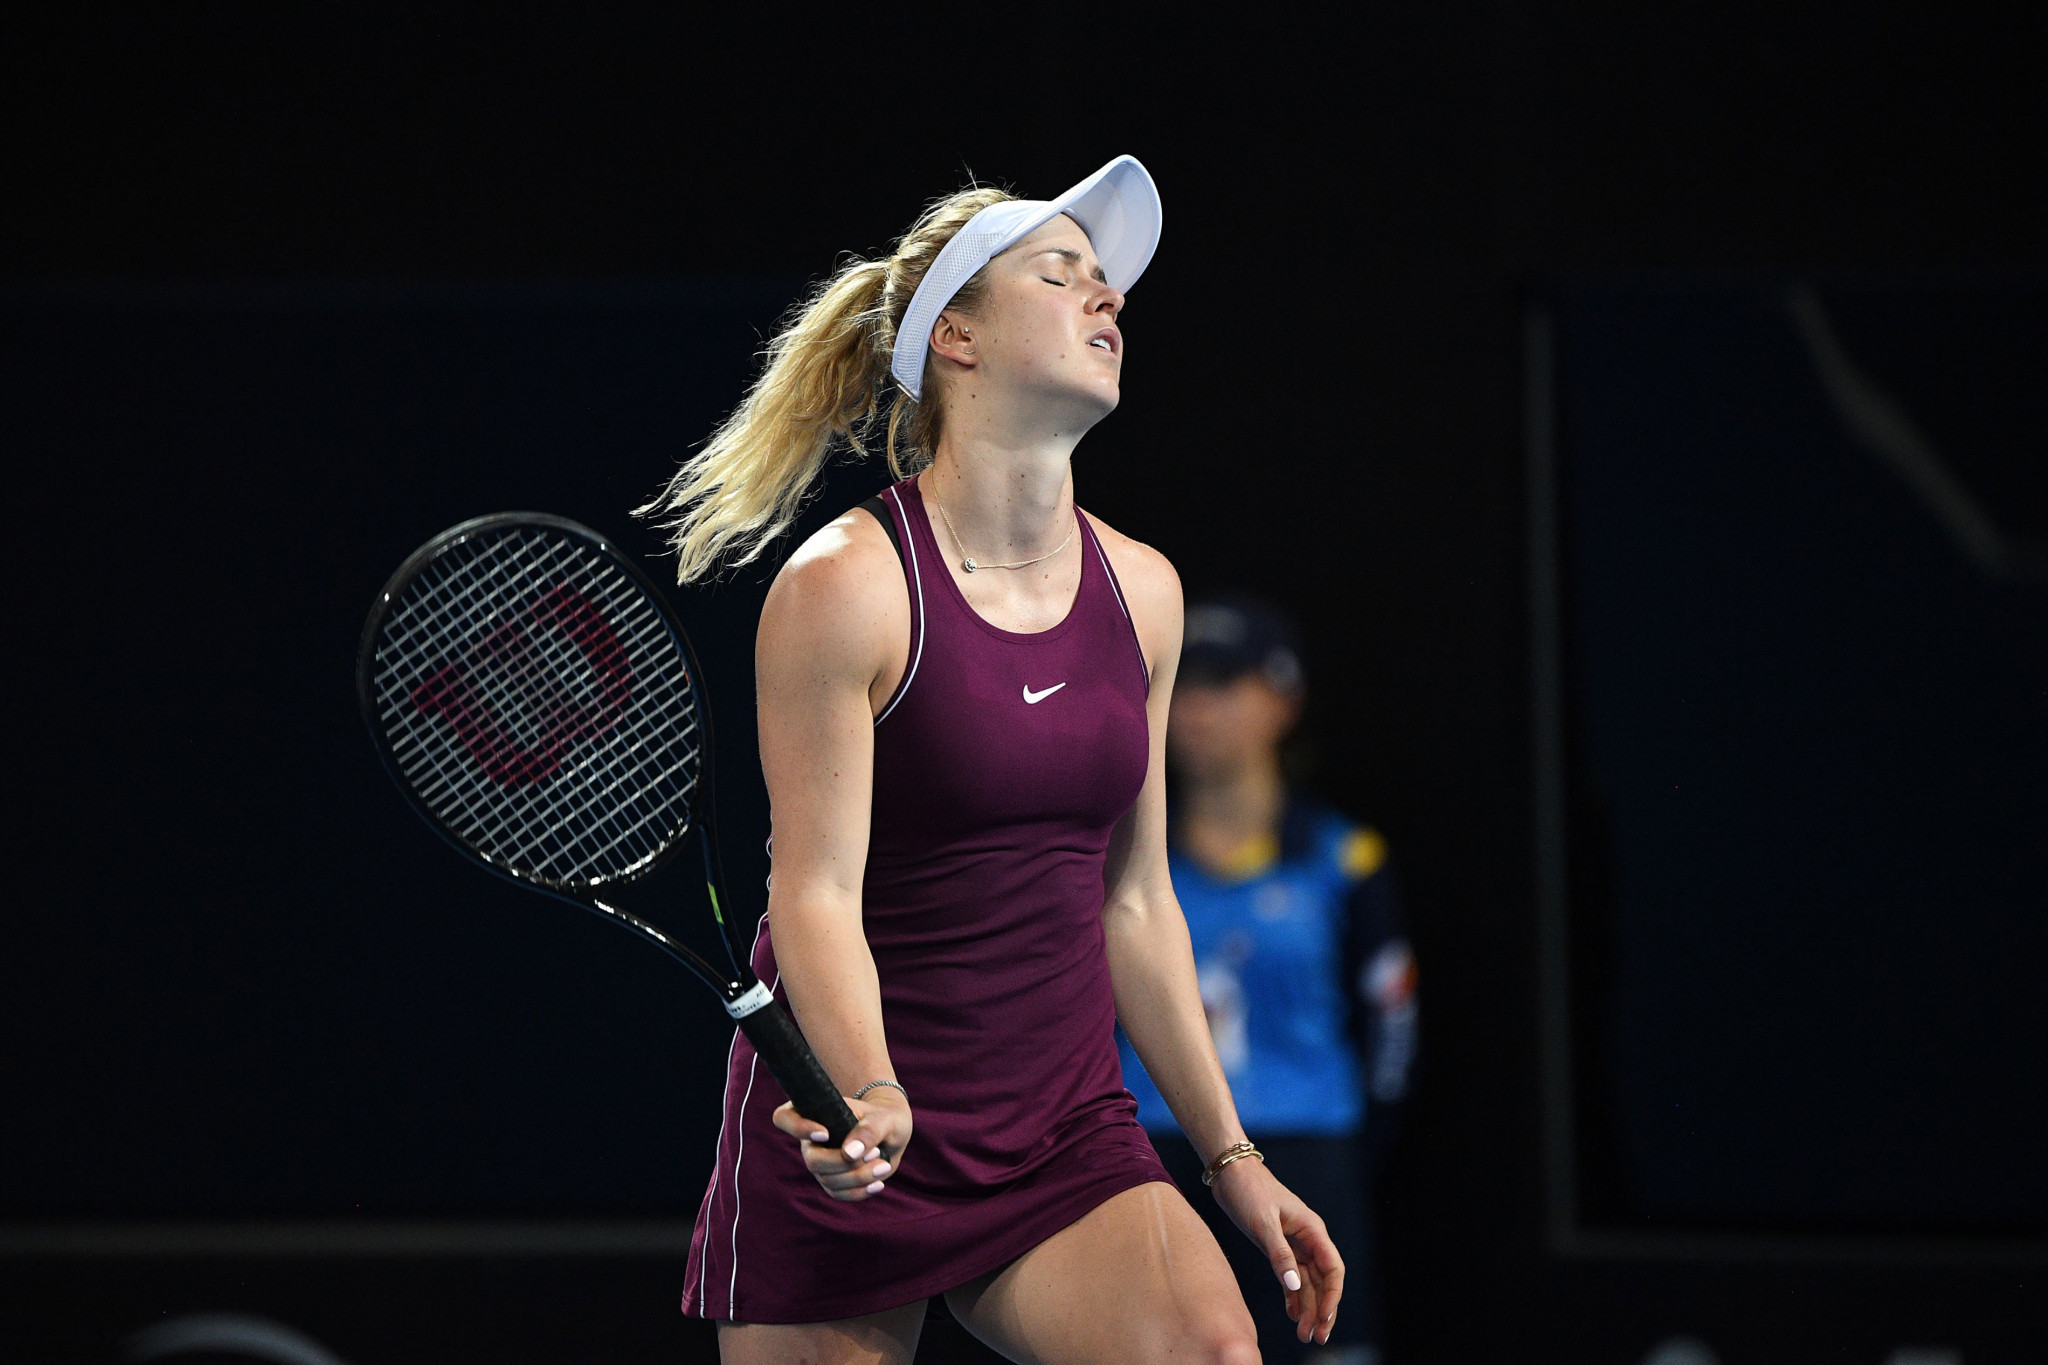 Defending champion and top seed Elina Svitolina of Ukraine exited the Brisbane International after suffering a defeat to Belarus's Aliaksandra Sasnovich ©Getty Images